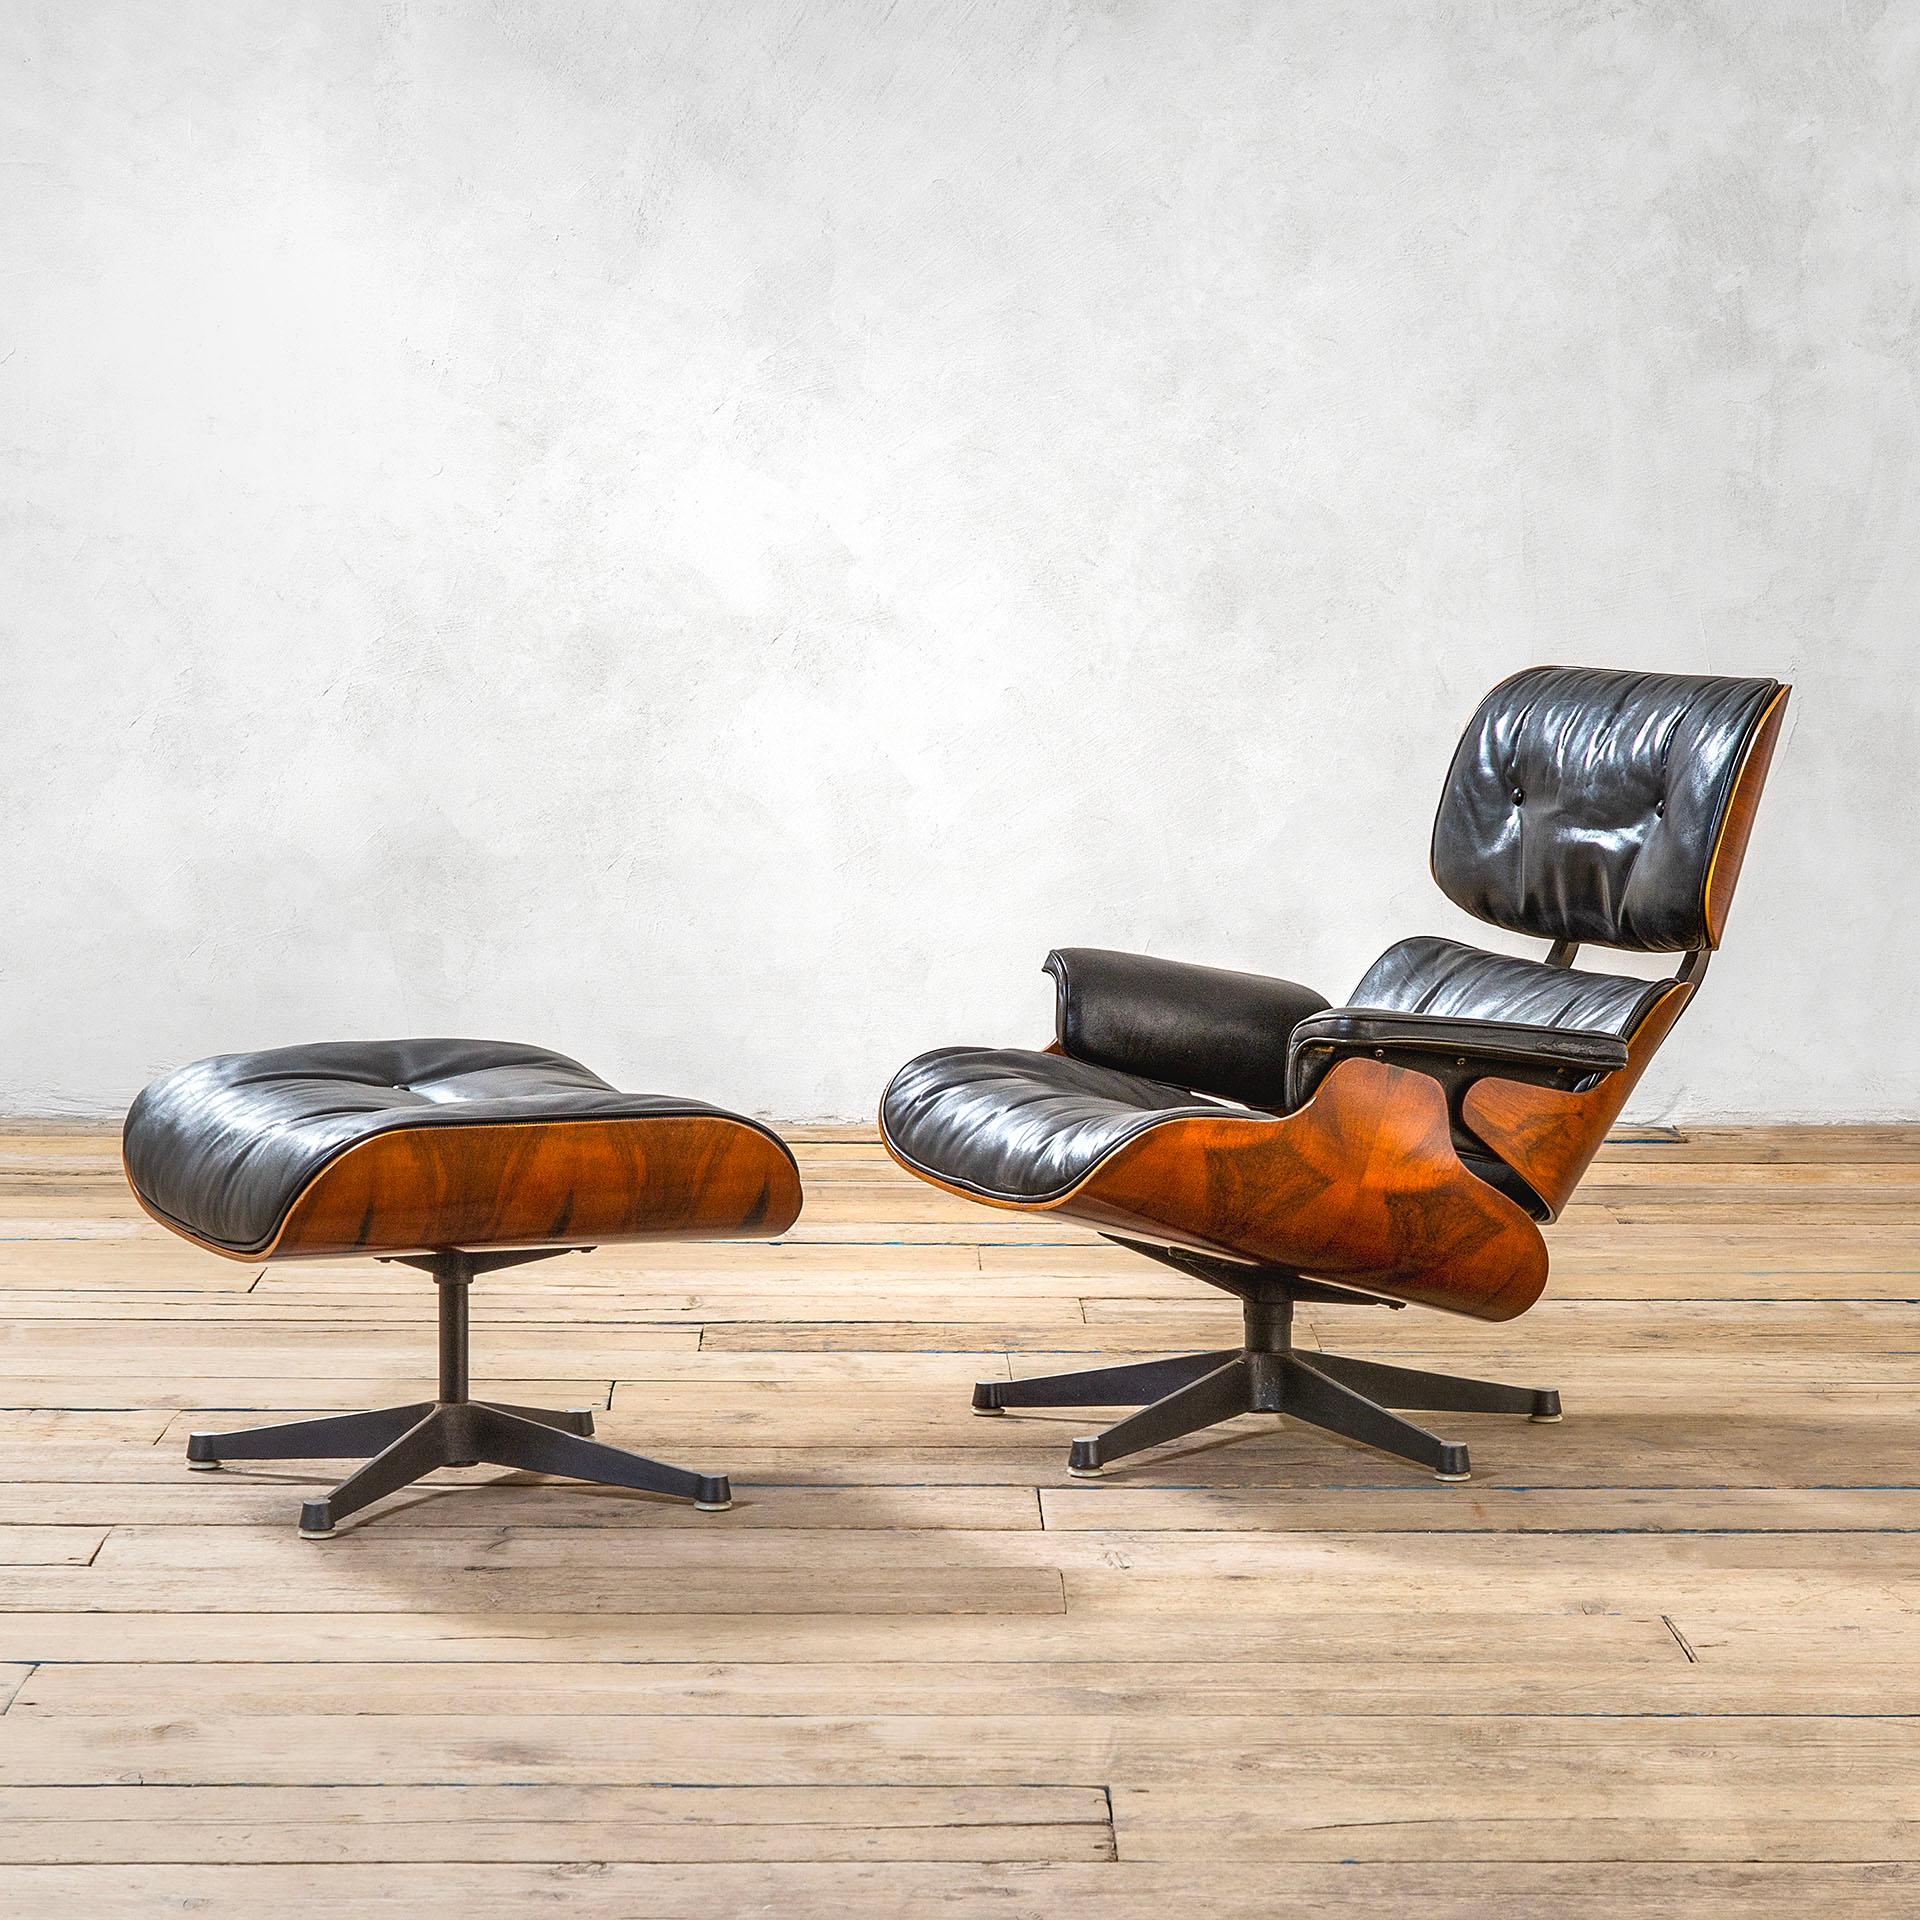 Charles Eames is a very important designer in design history, who worked along with his wife Ray and together realized many iconic pieces of furniture. Their relationship with Herman Miller began with molded plywood chairs in the late 1940s and